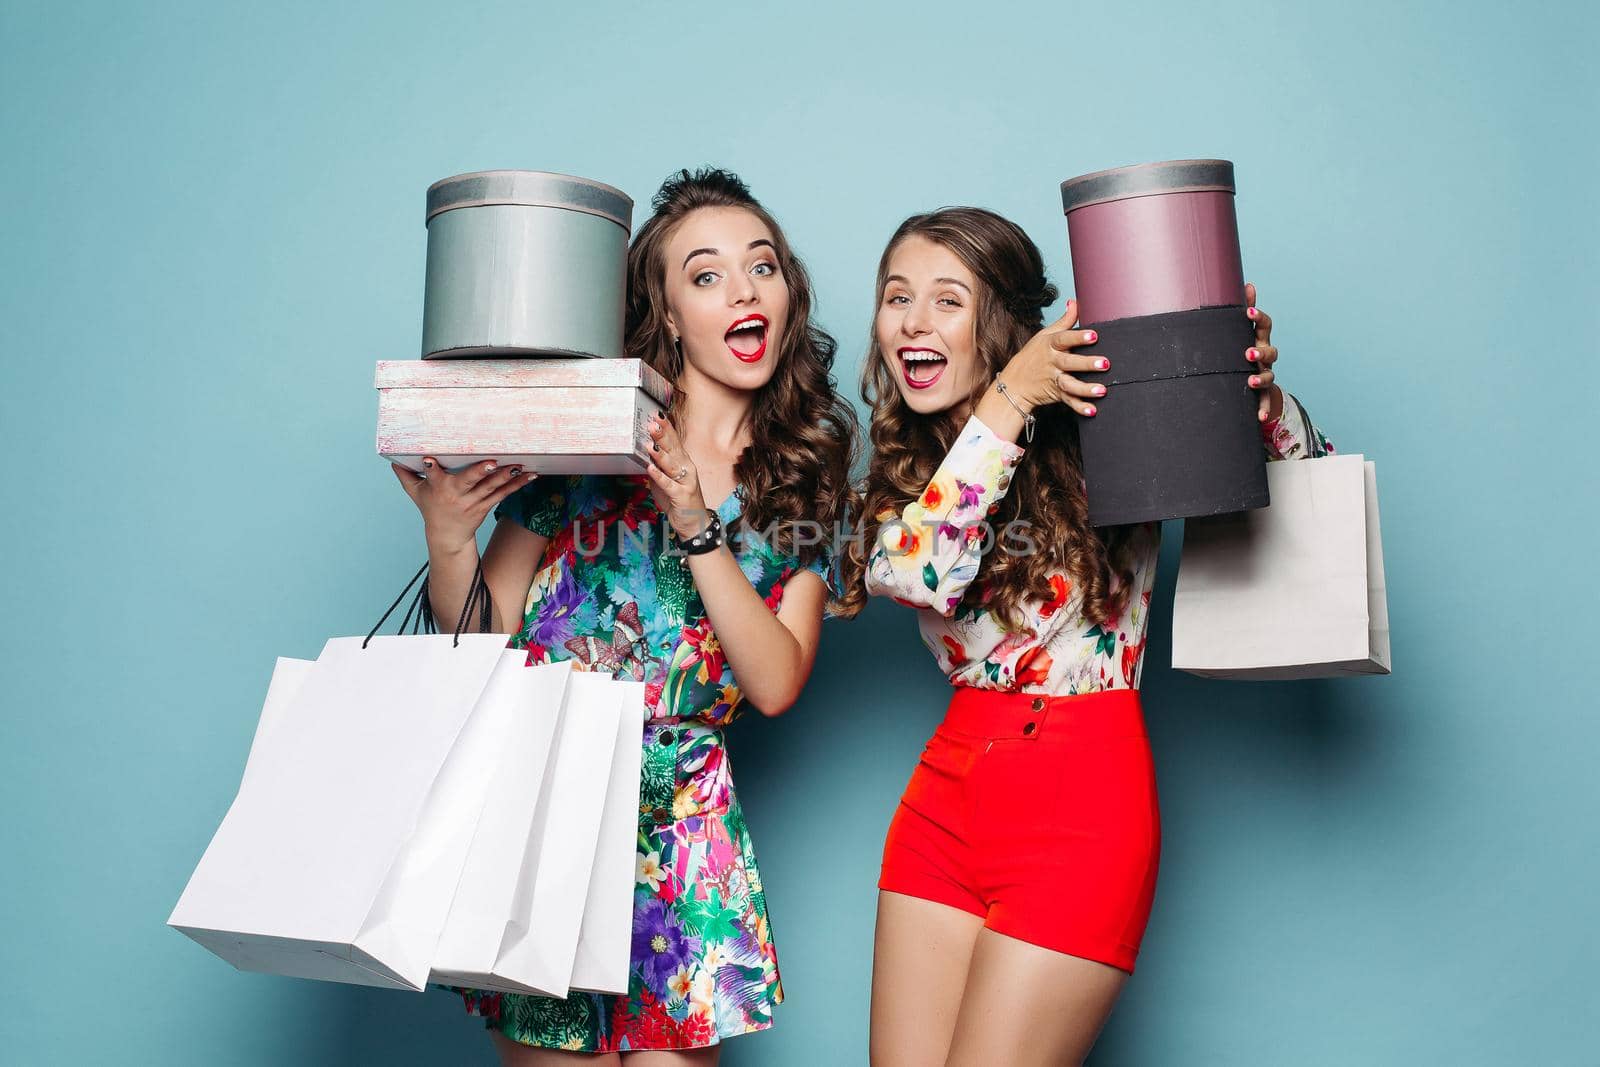 Studio portrait of two girlfriends with shopping bags after shopping. Two friends in trendy looks with wavy hair holding new clothes and hat in shopping bags over blue background.